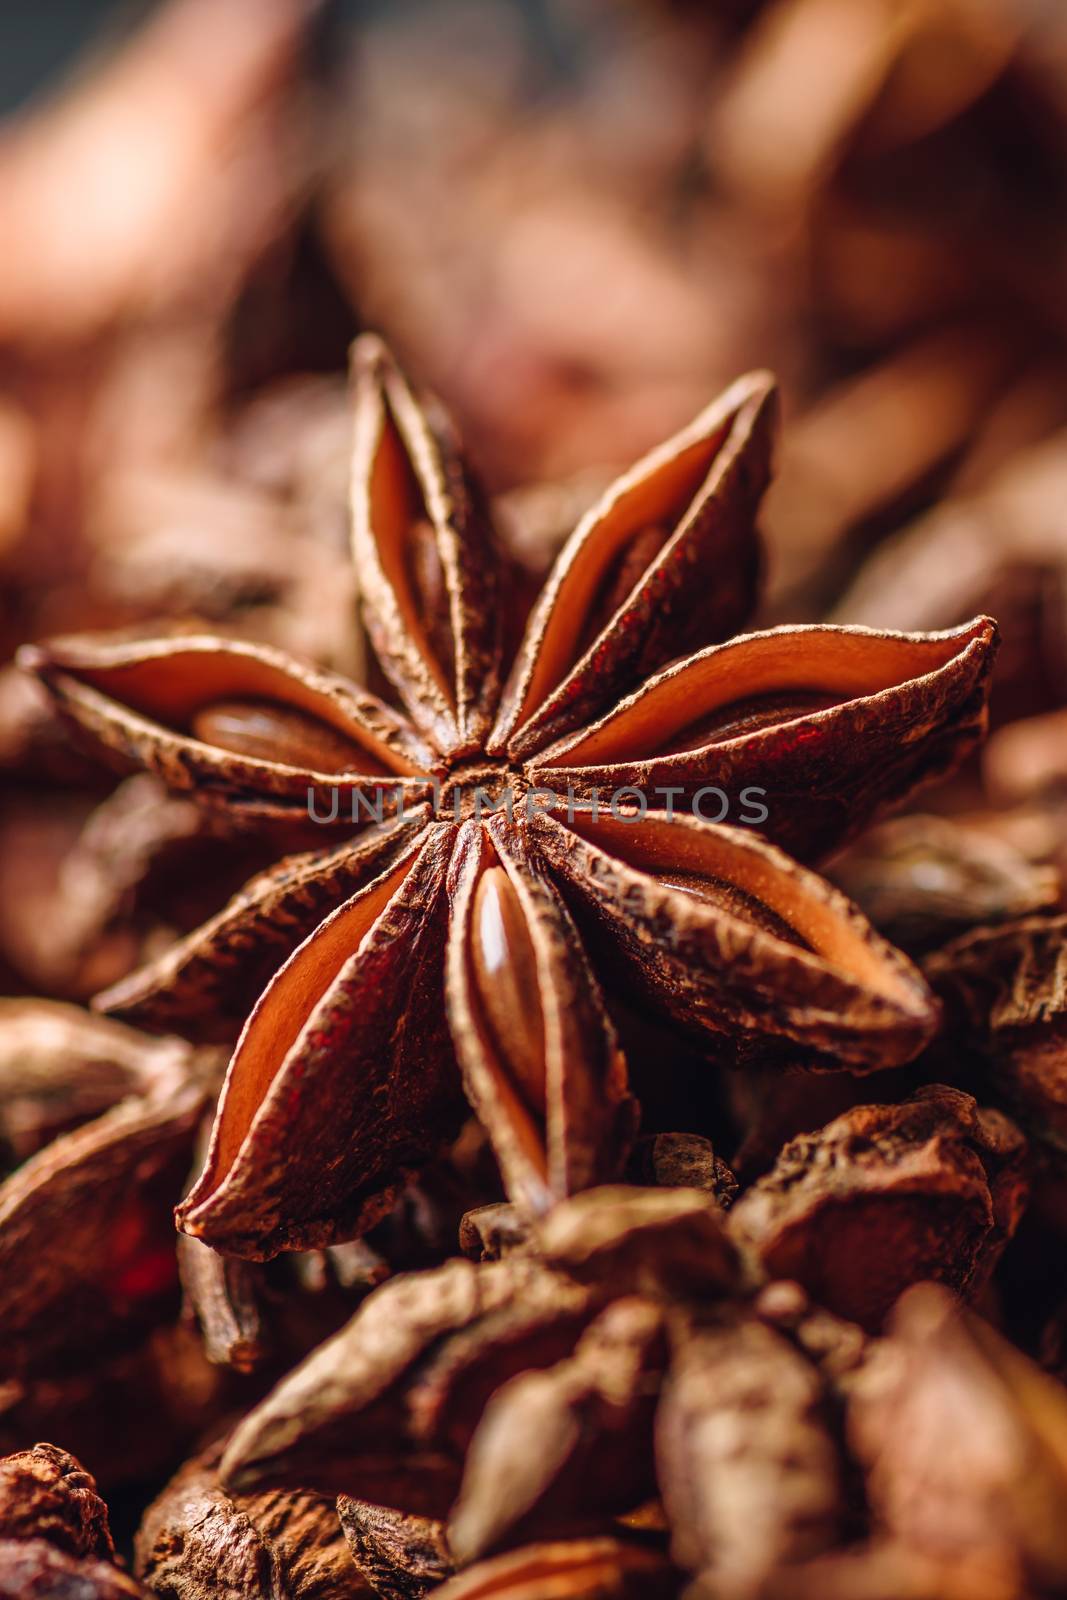 Background of Star Anise Fruits and Seeds. by Seva_blsv